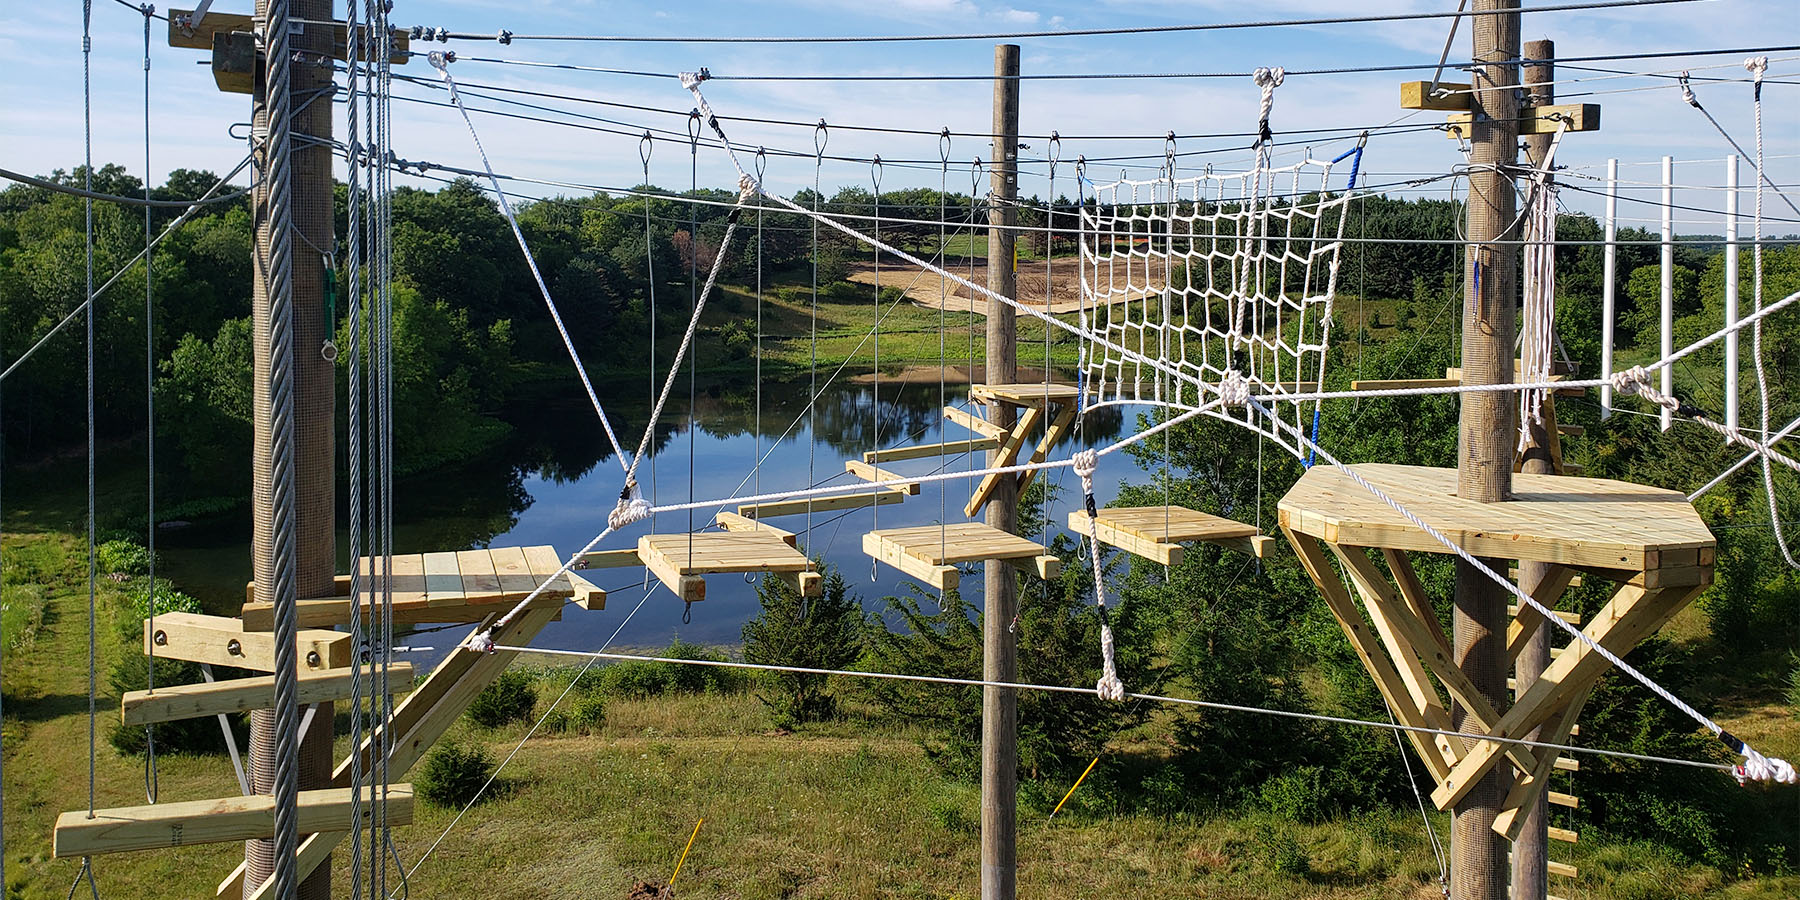 Aerial, canopy rope bridge challenge course with platforms designed and built by ABEE Inc. in Lakeville, Minnesota.